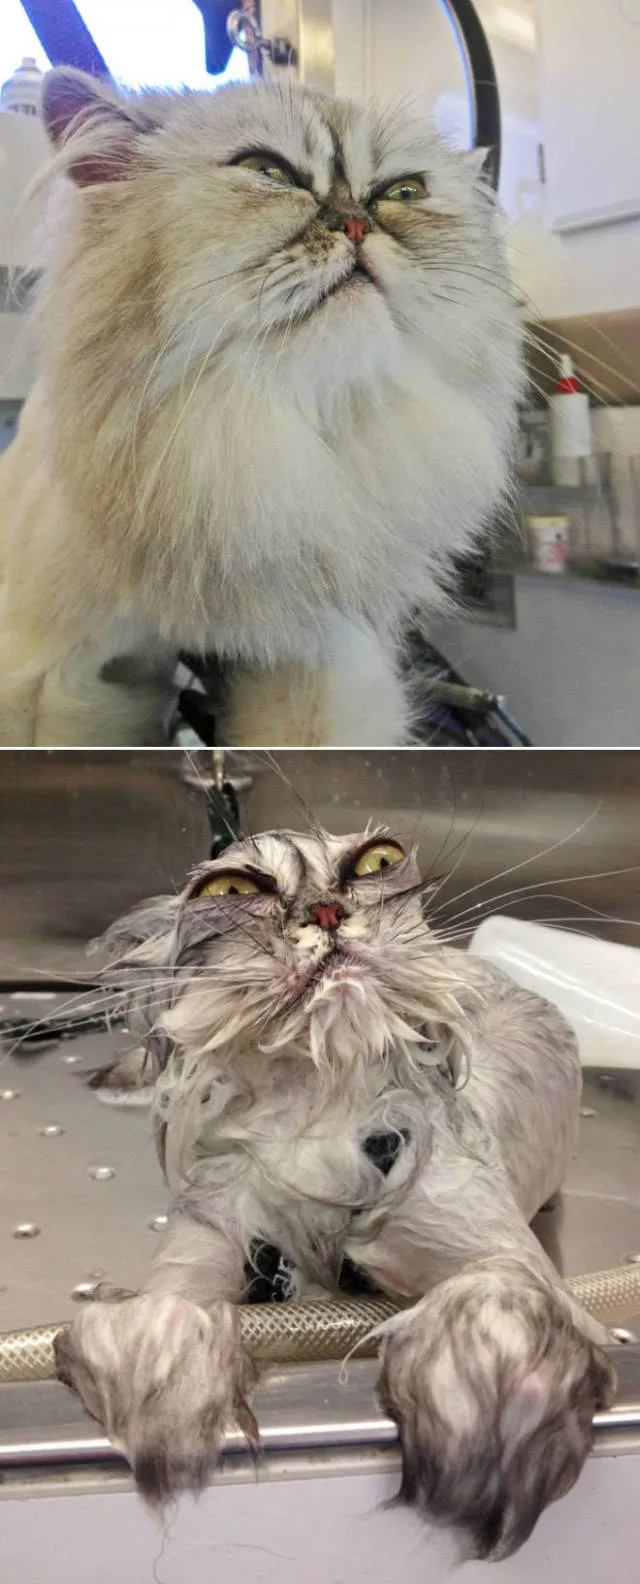 Hilarious faces of animals after bath - #1 